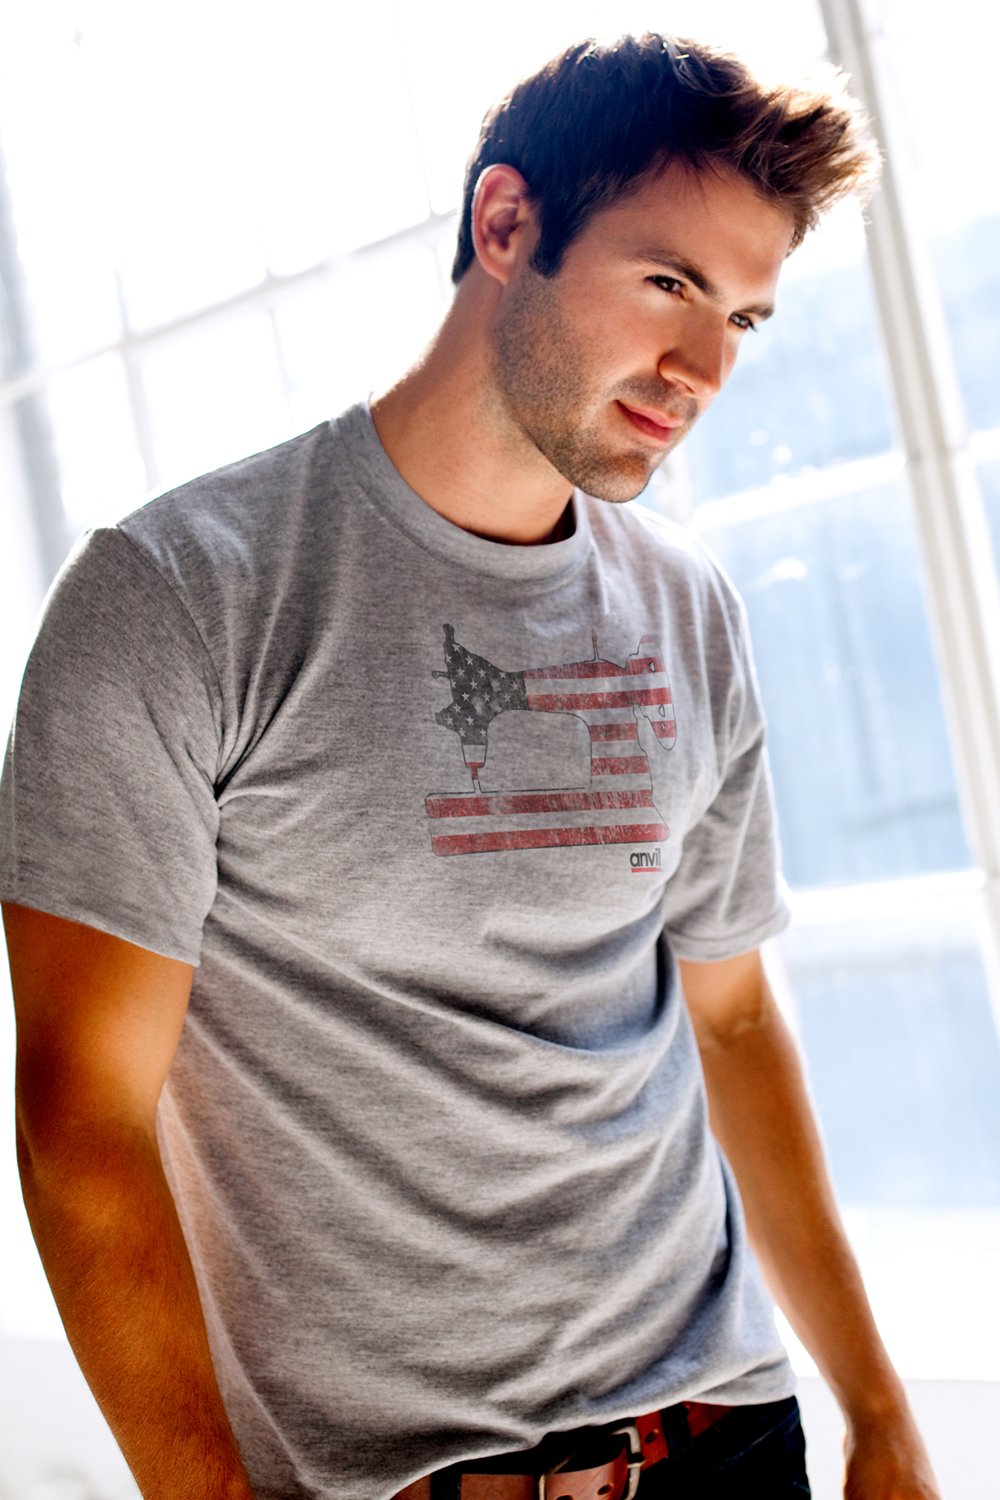 American Classic Tee - Made in the USA from Imported Fabric